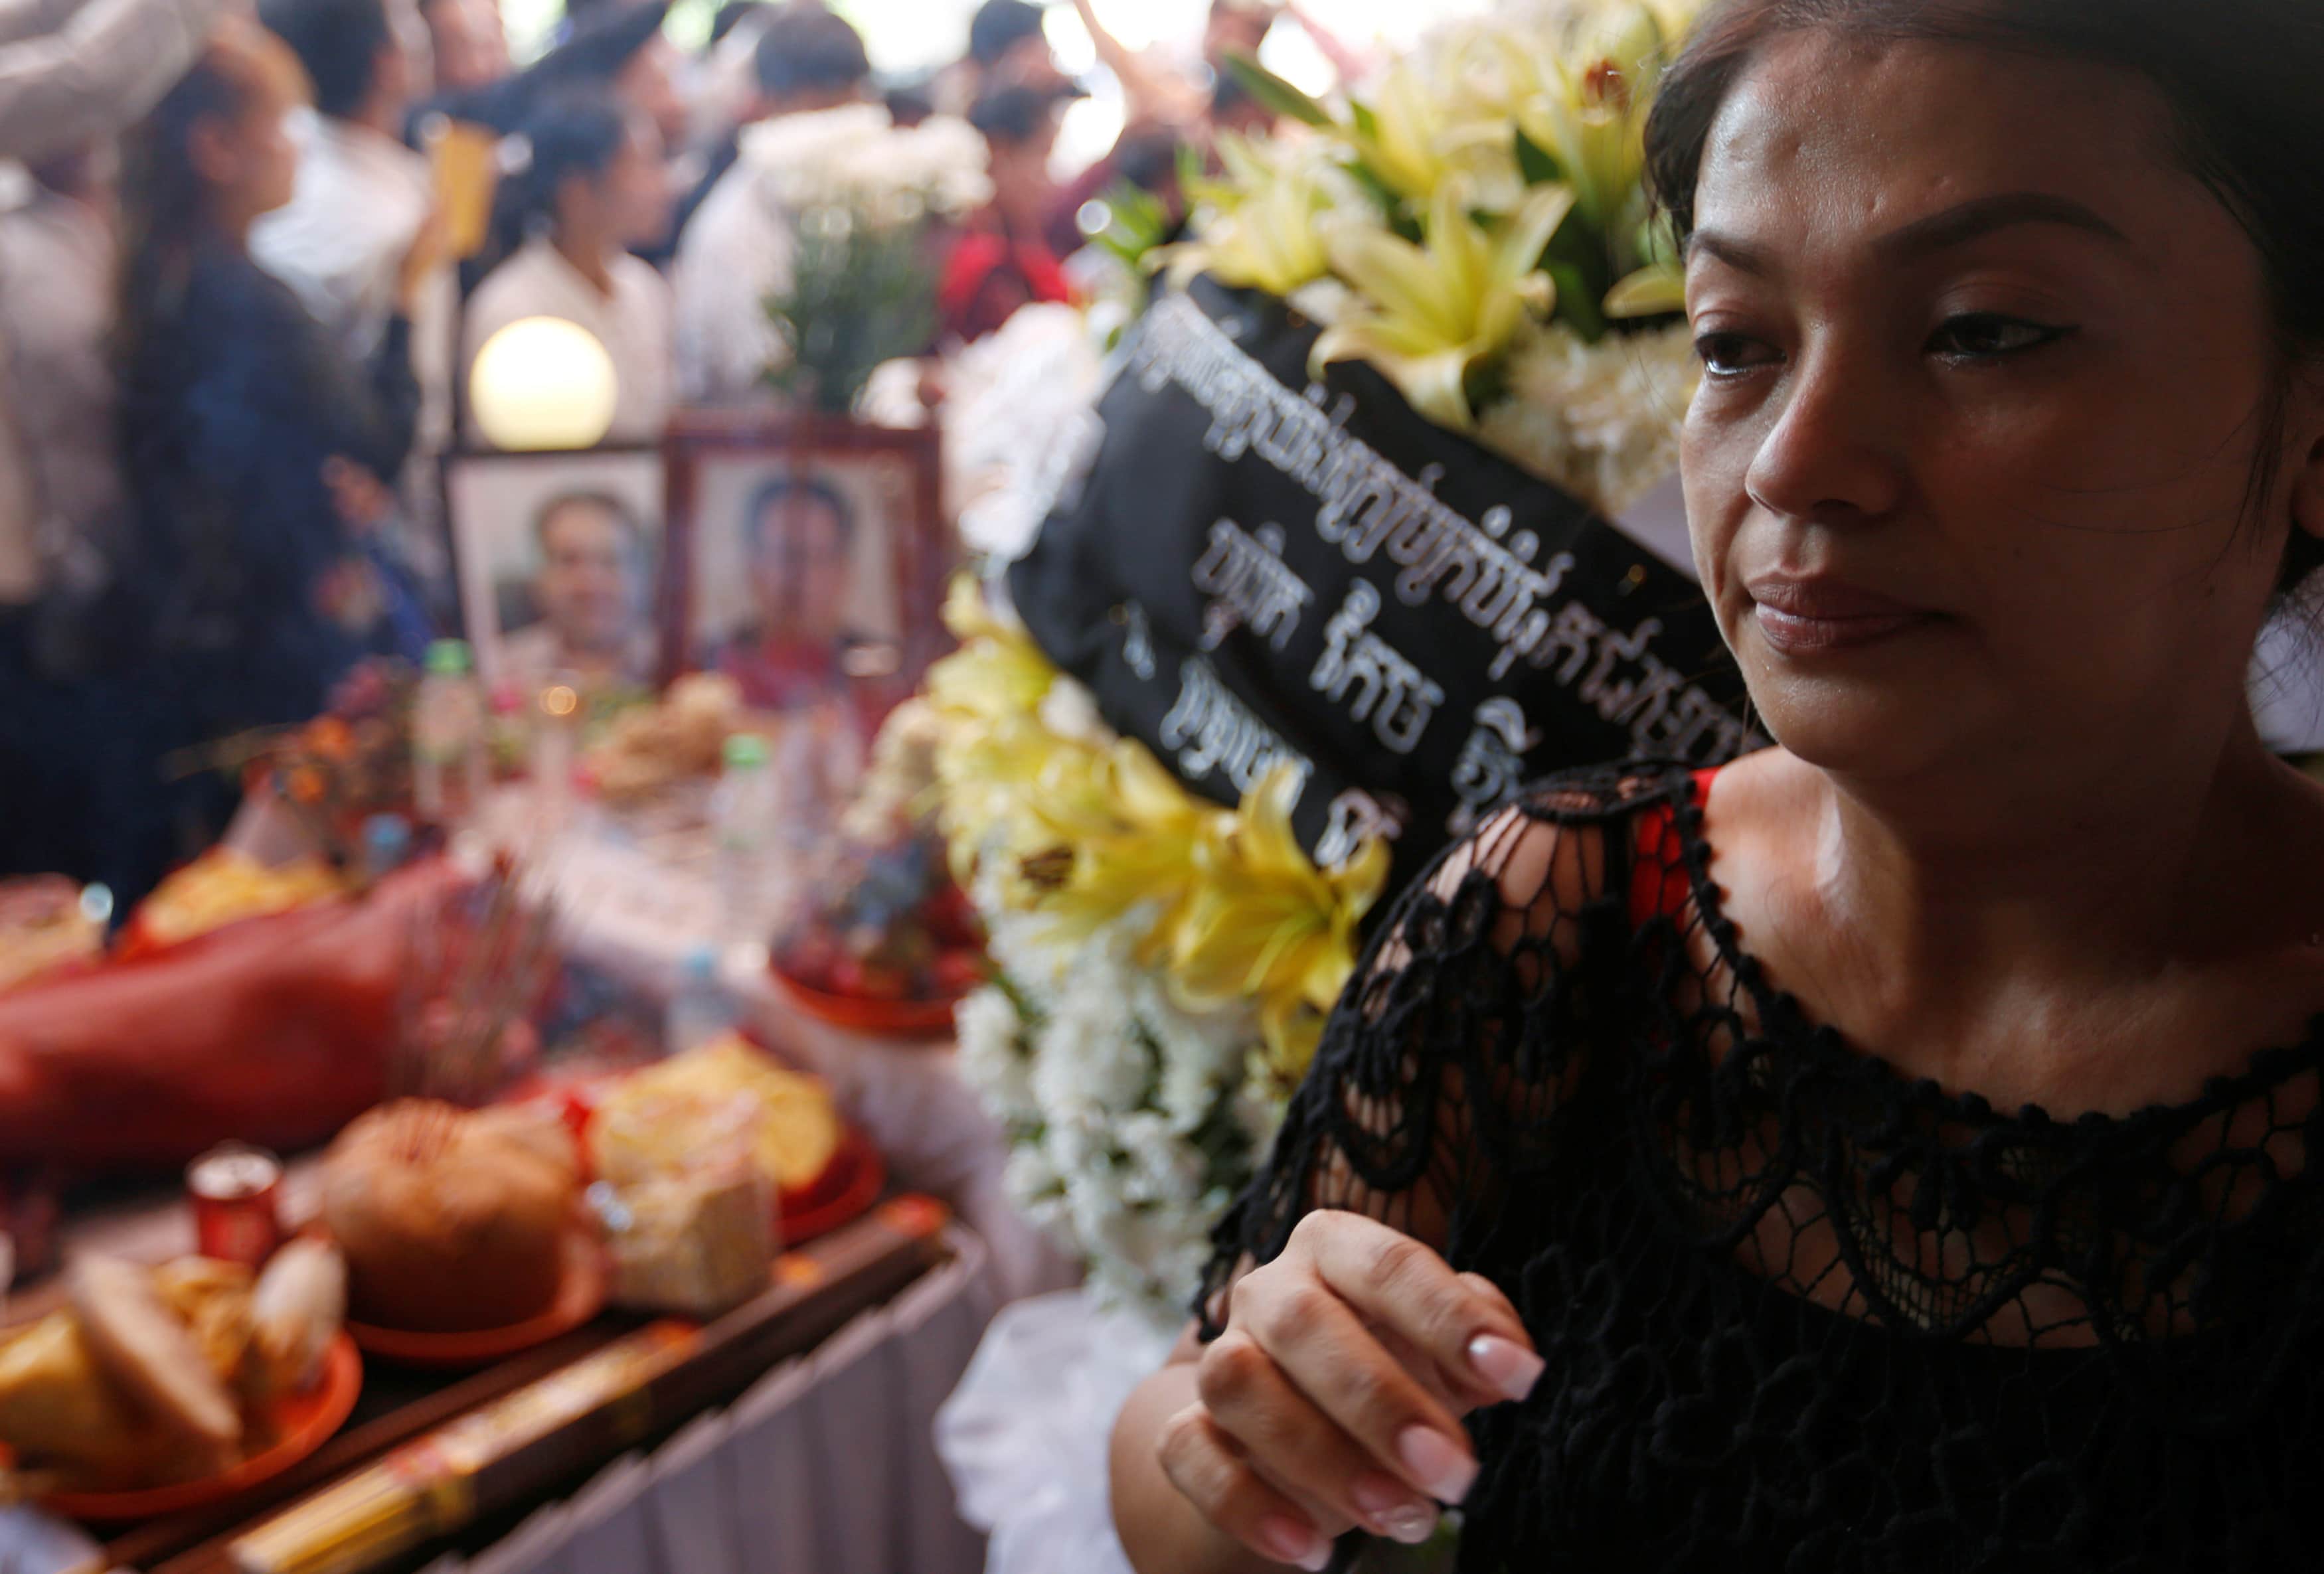 The wife of political analyst Kem Ley attends his funeral ceremony at a pagoda in Phnom Penh, 11 July 2016, REUTERS/Samrang Pring